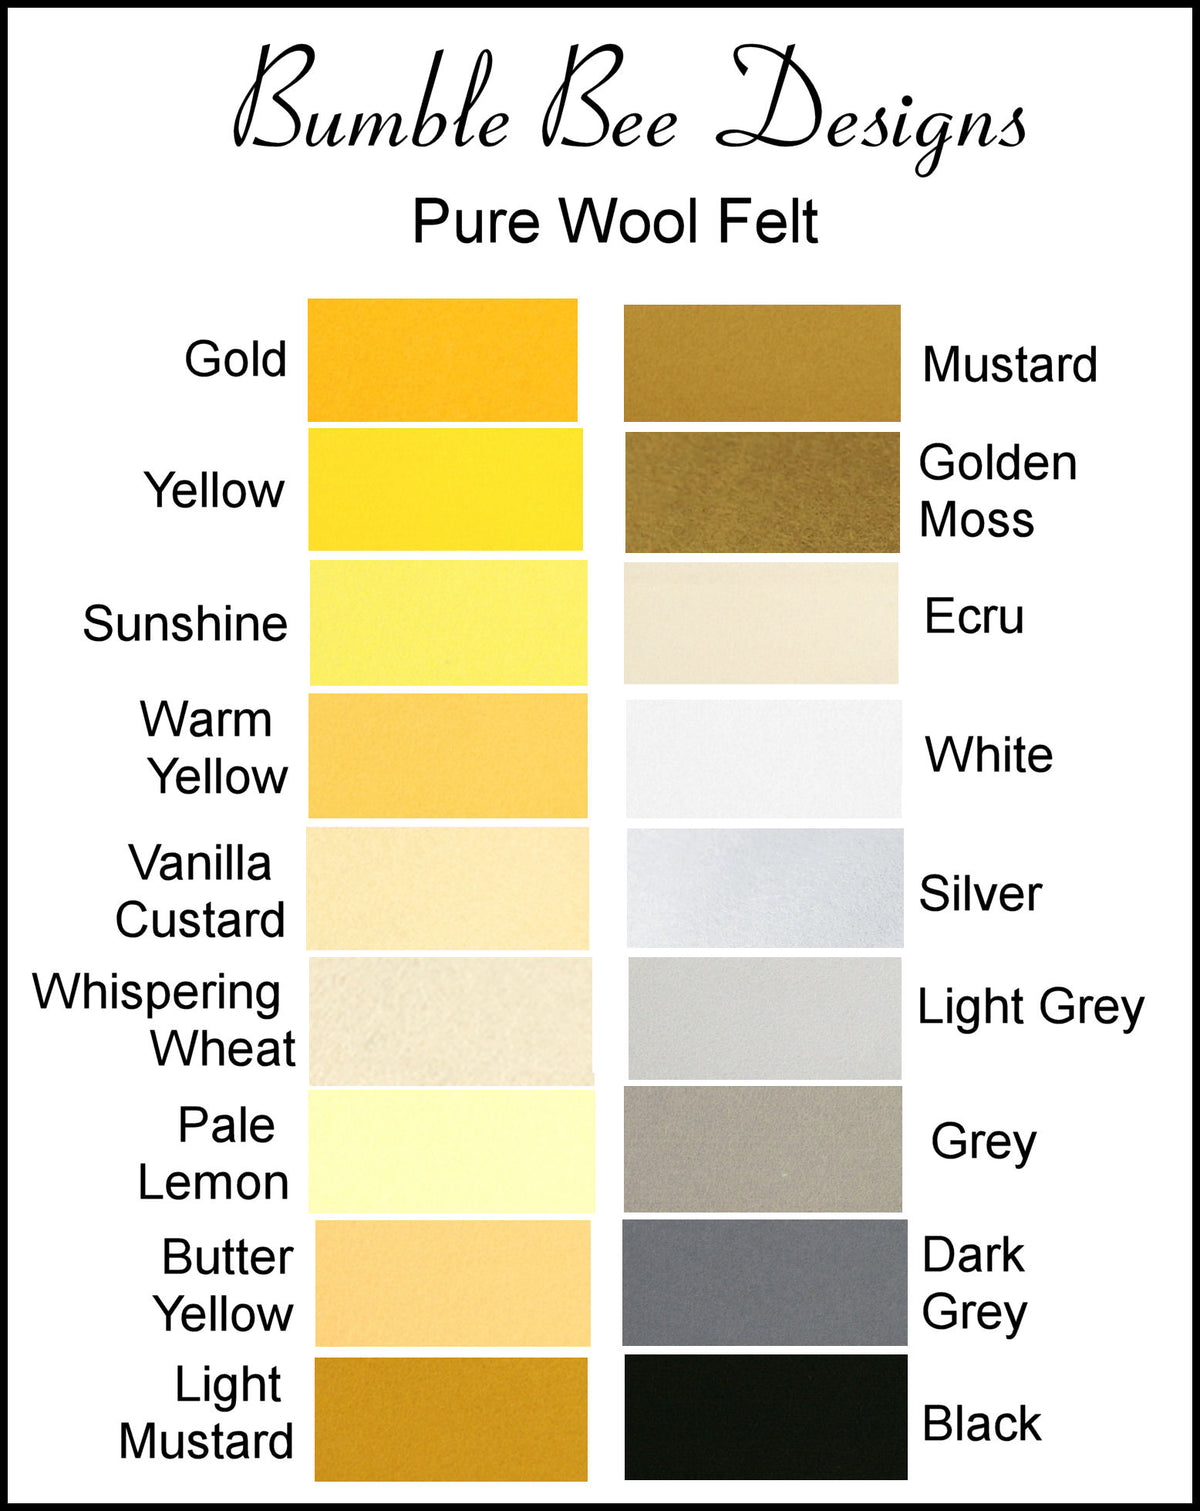 Pure Wool Felt - Yellow and Neutral Shades